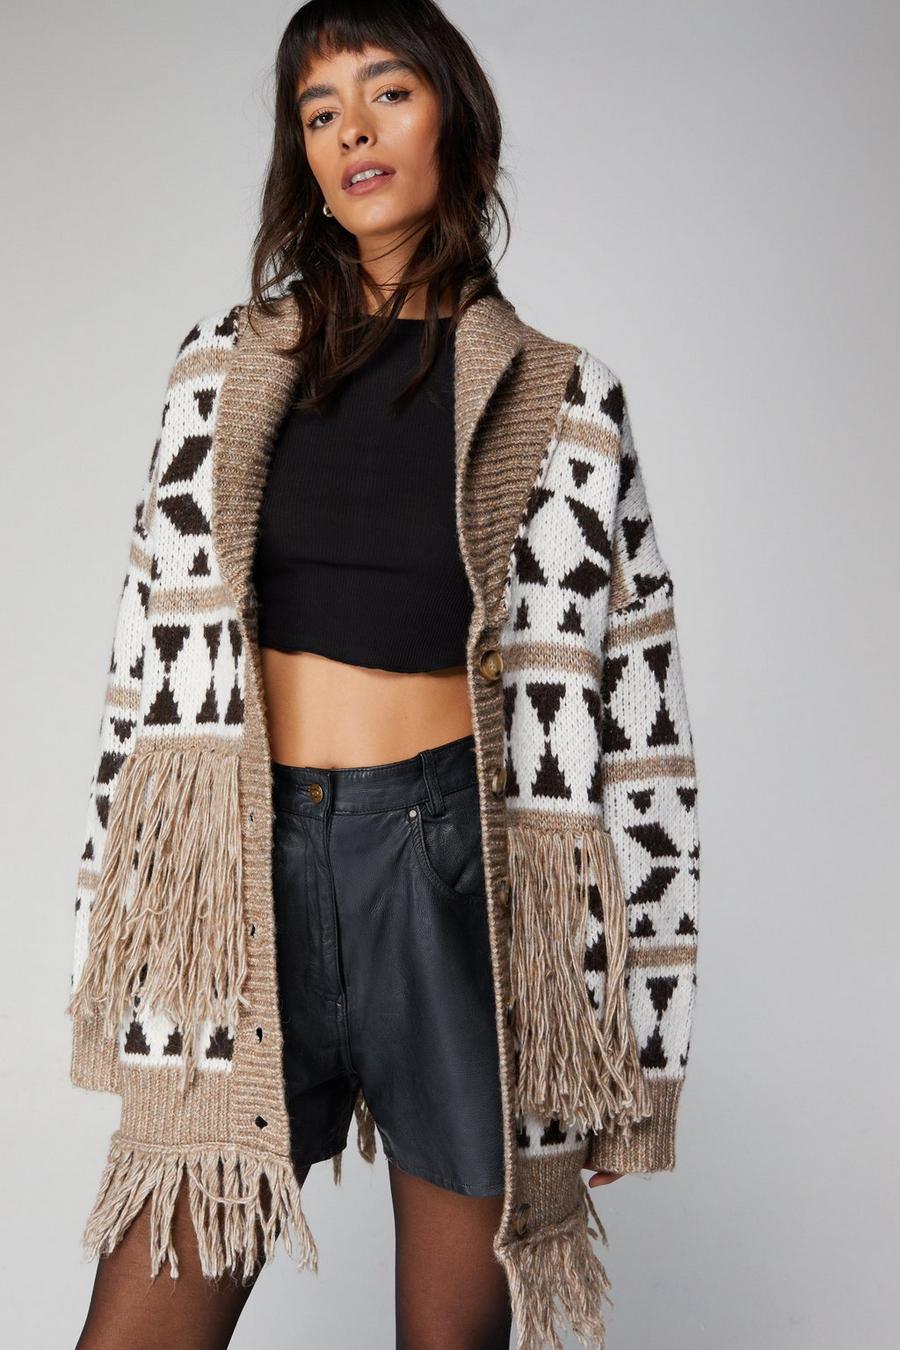 Winter Outfits | Winter Clothes & Fashion | Nasty Gal